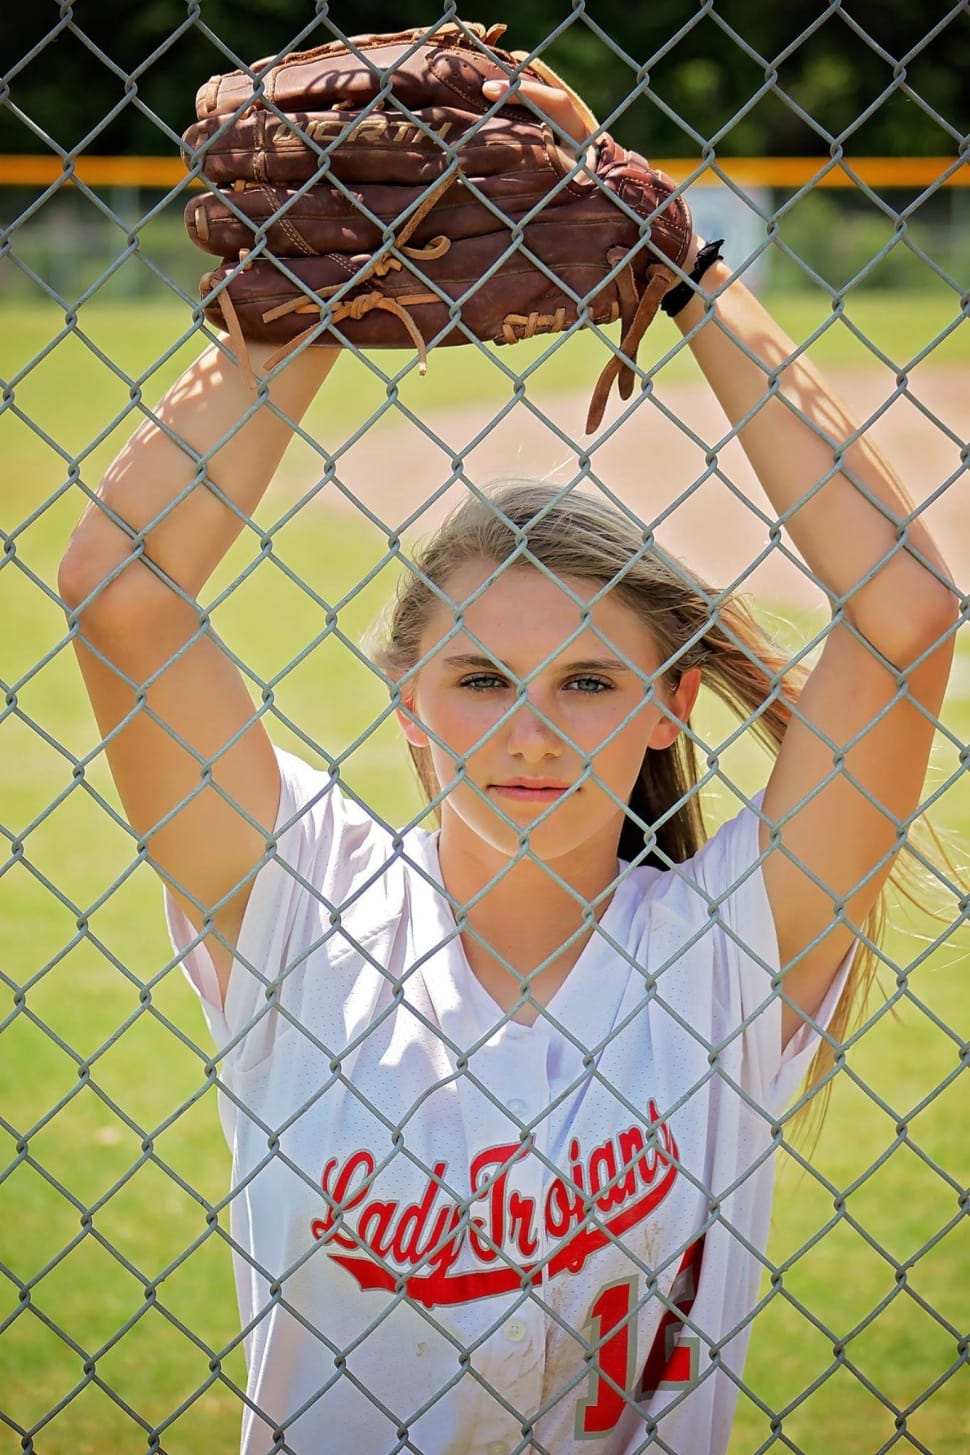 woman in baseball outfit posing free image